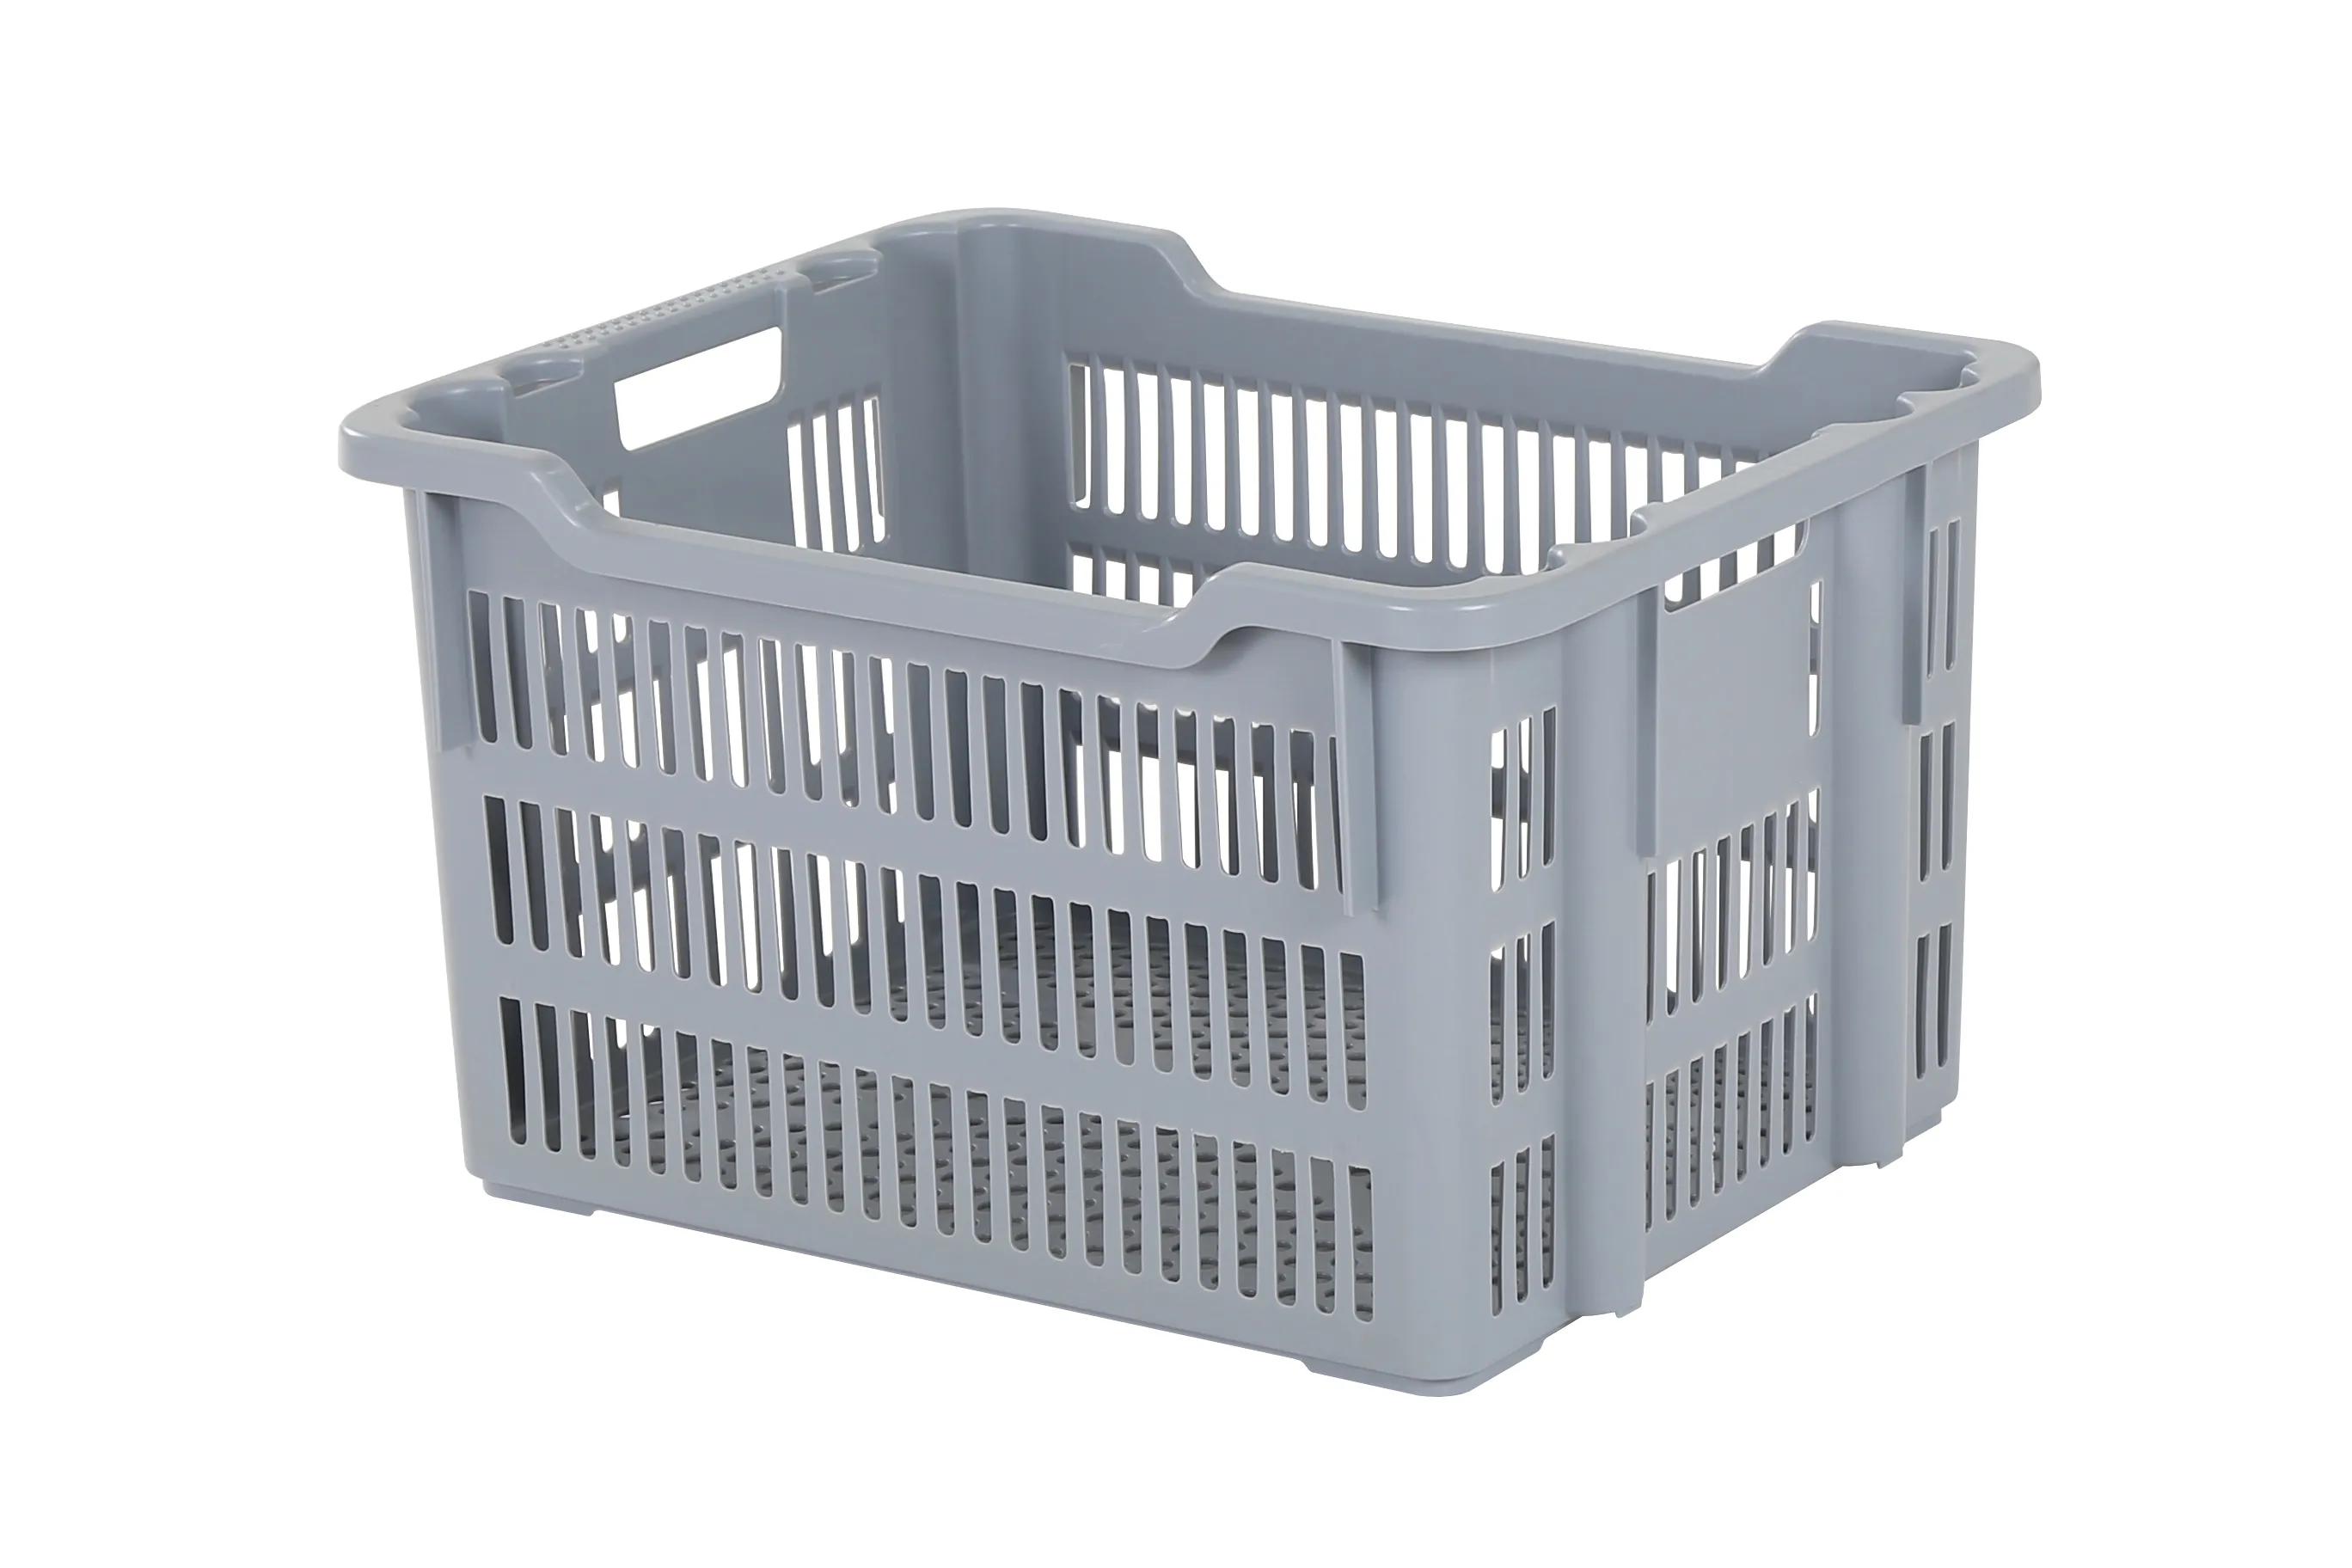 Stacking nestable crate - 620 x 500 x H 360 mm